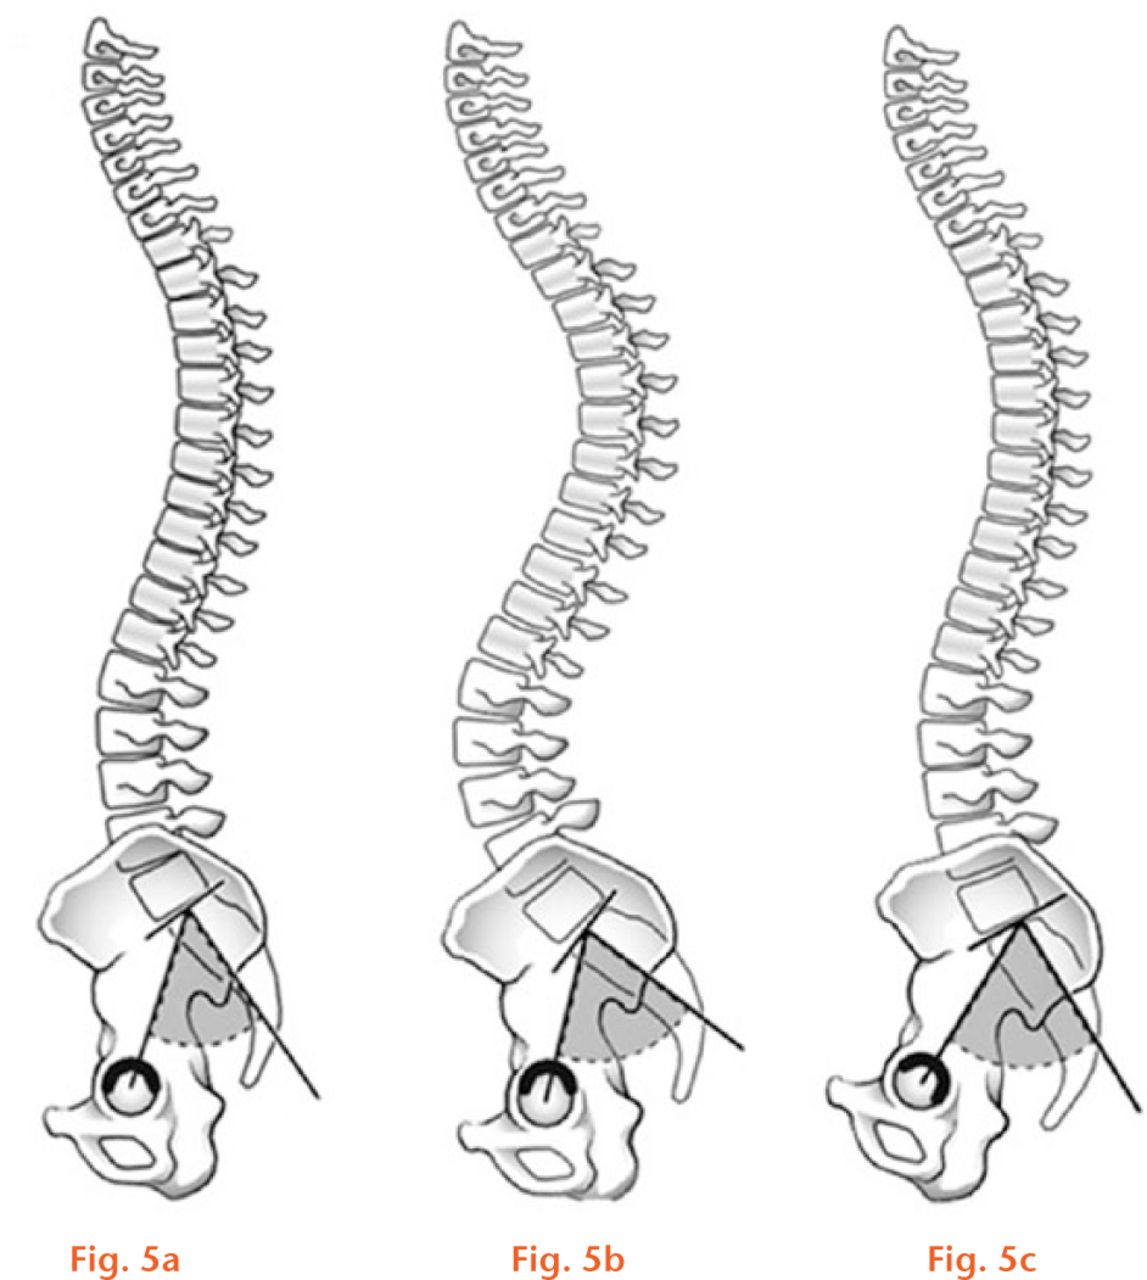  
          Images showing a) normal PI with normal lumbar lordosis; b) increased PI with compensatory increase in lumbar lordosis and c) increased PI with compensatory posterior pelvic tilt and undercovering of the hips.
        